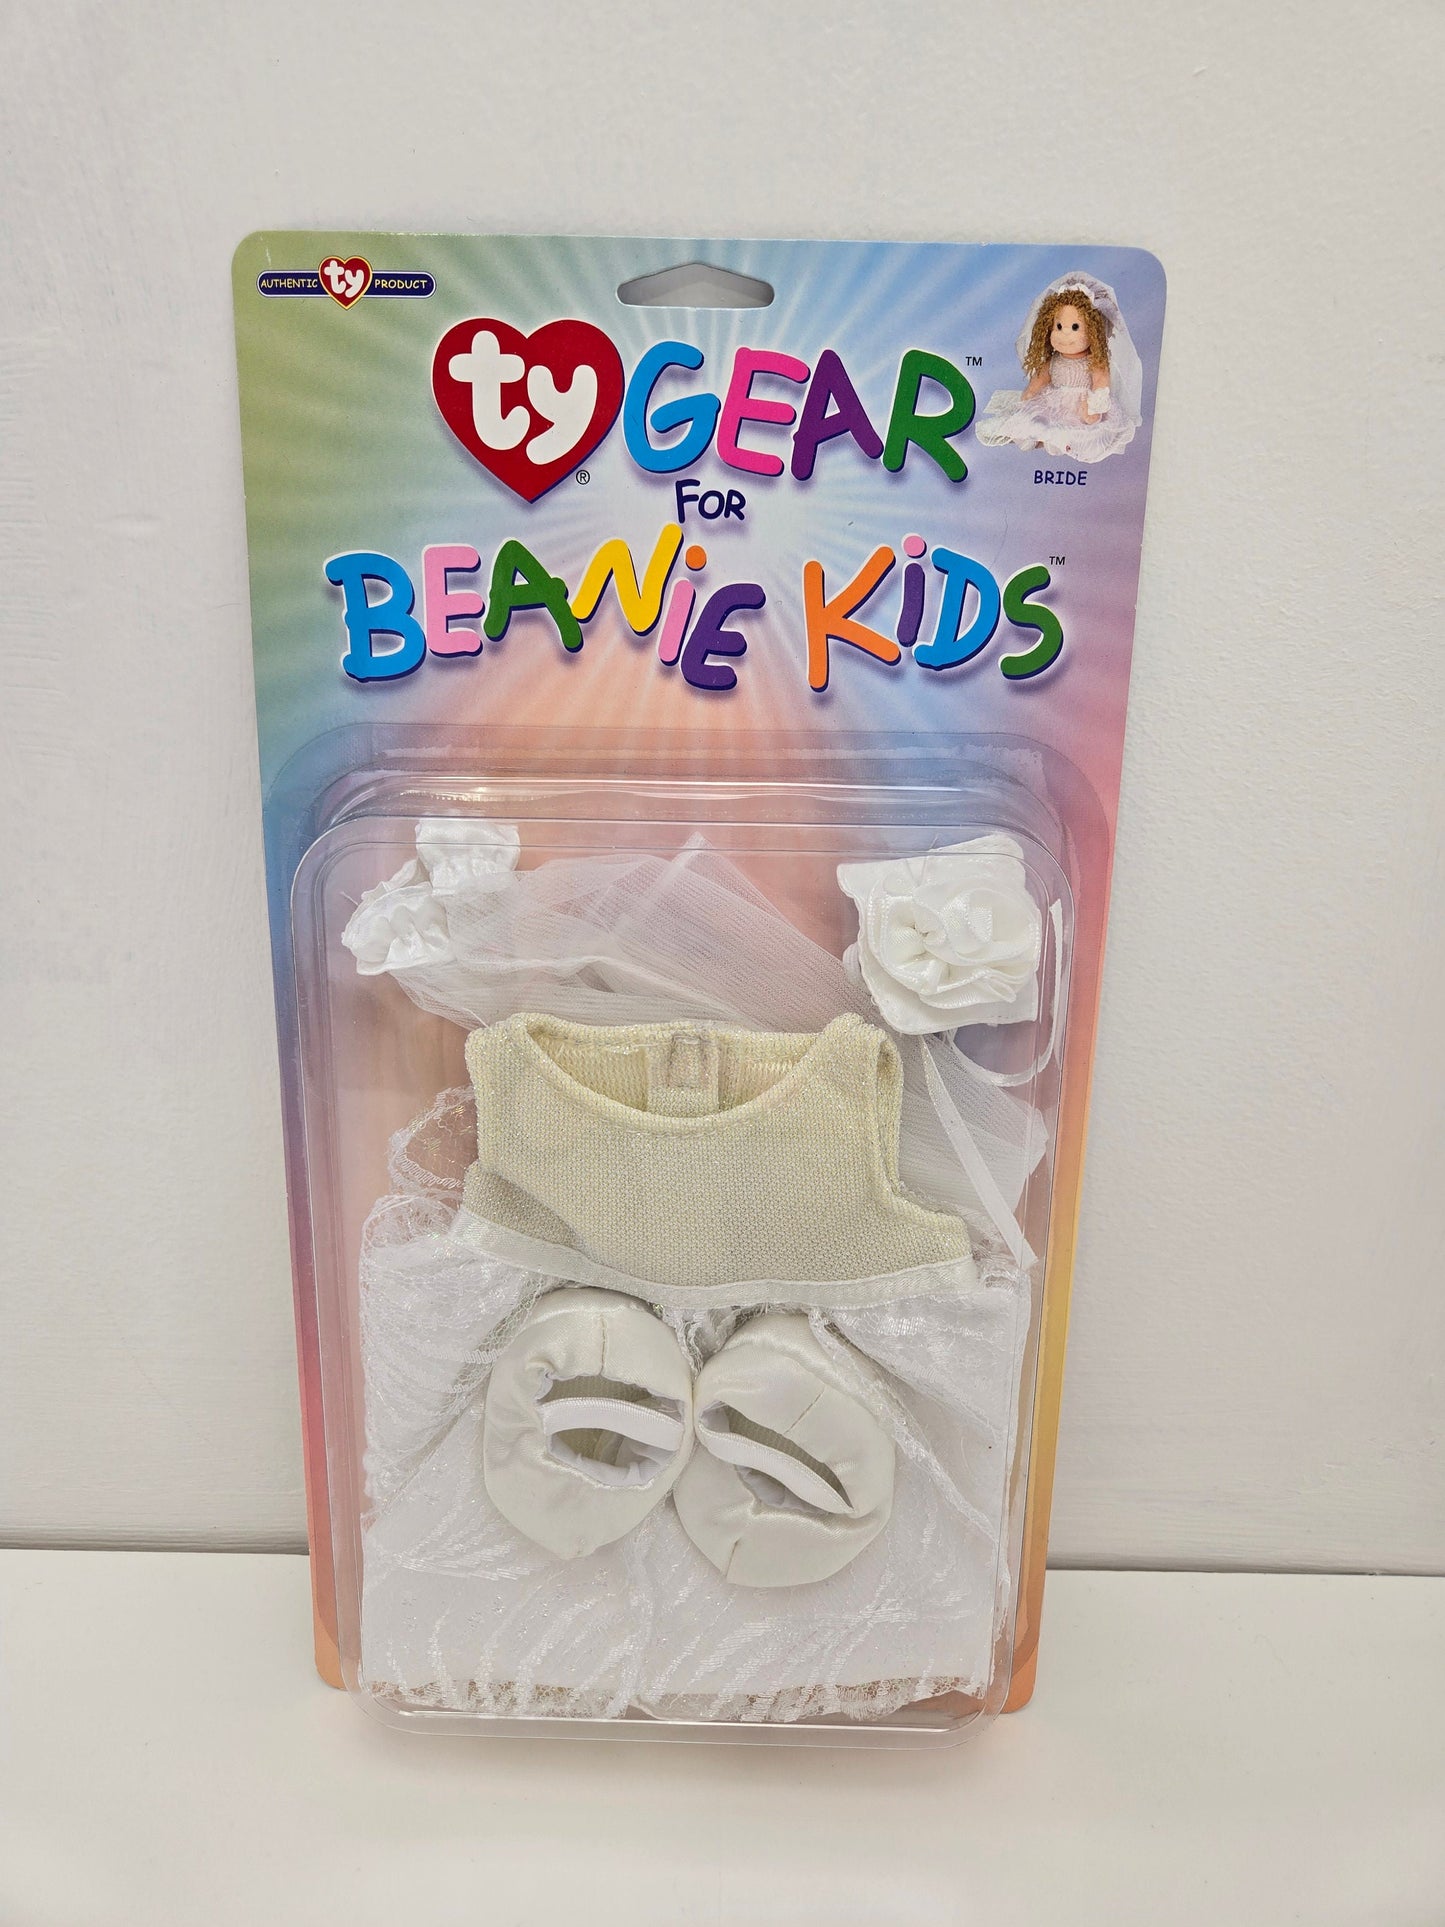 Ty Beanie Kid Gear Clothing Outfit for Beanie Kids - Bride - New in Box!